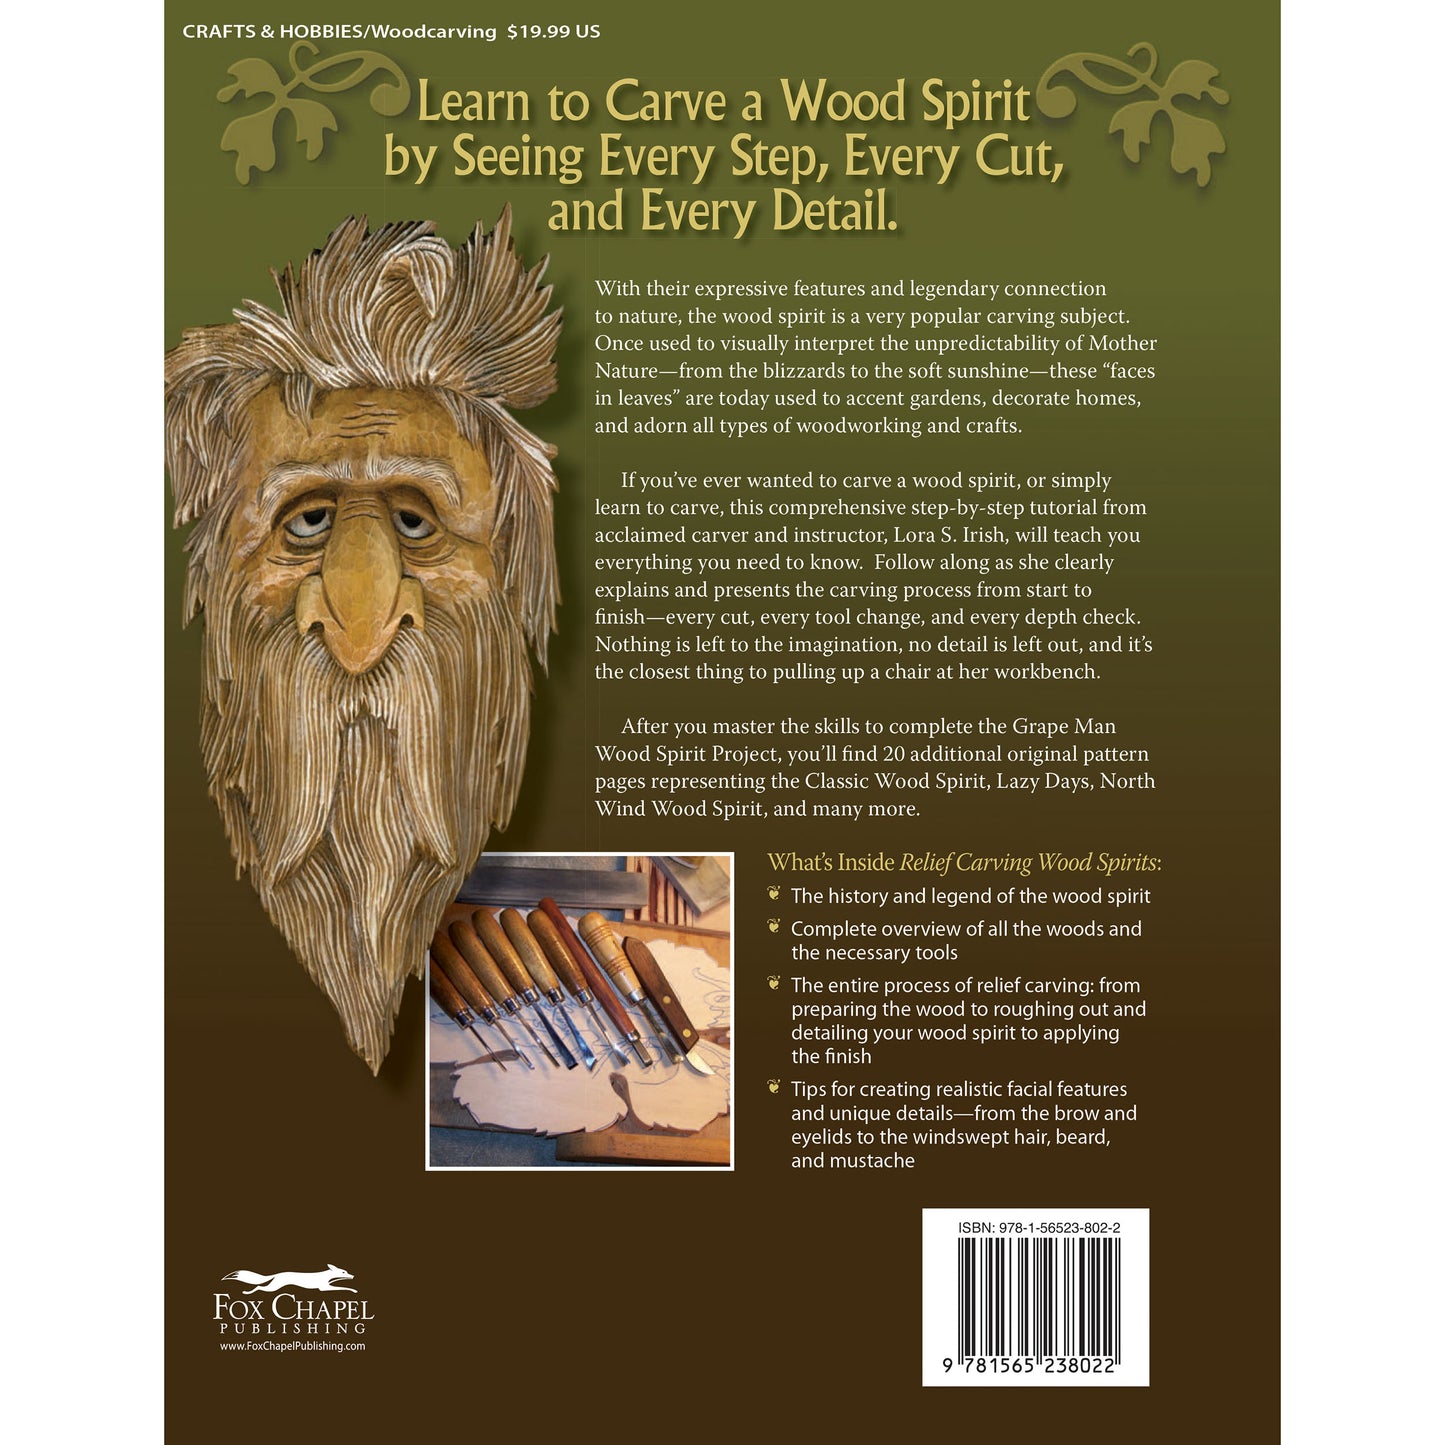 Relief Carving Wood Spirits Revised Edition alt 1